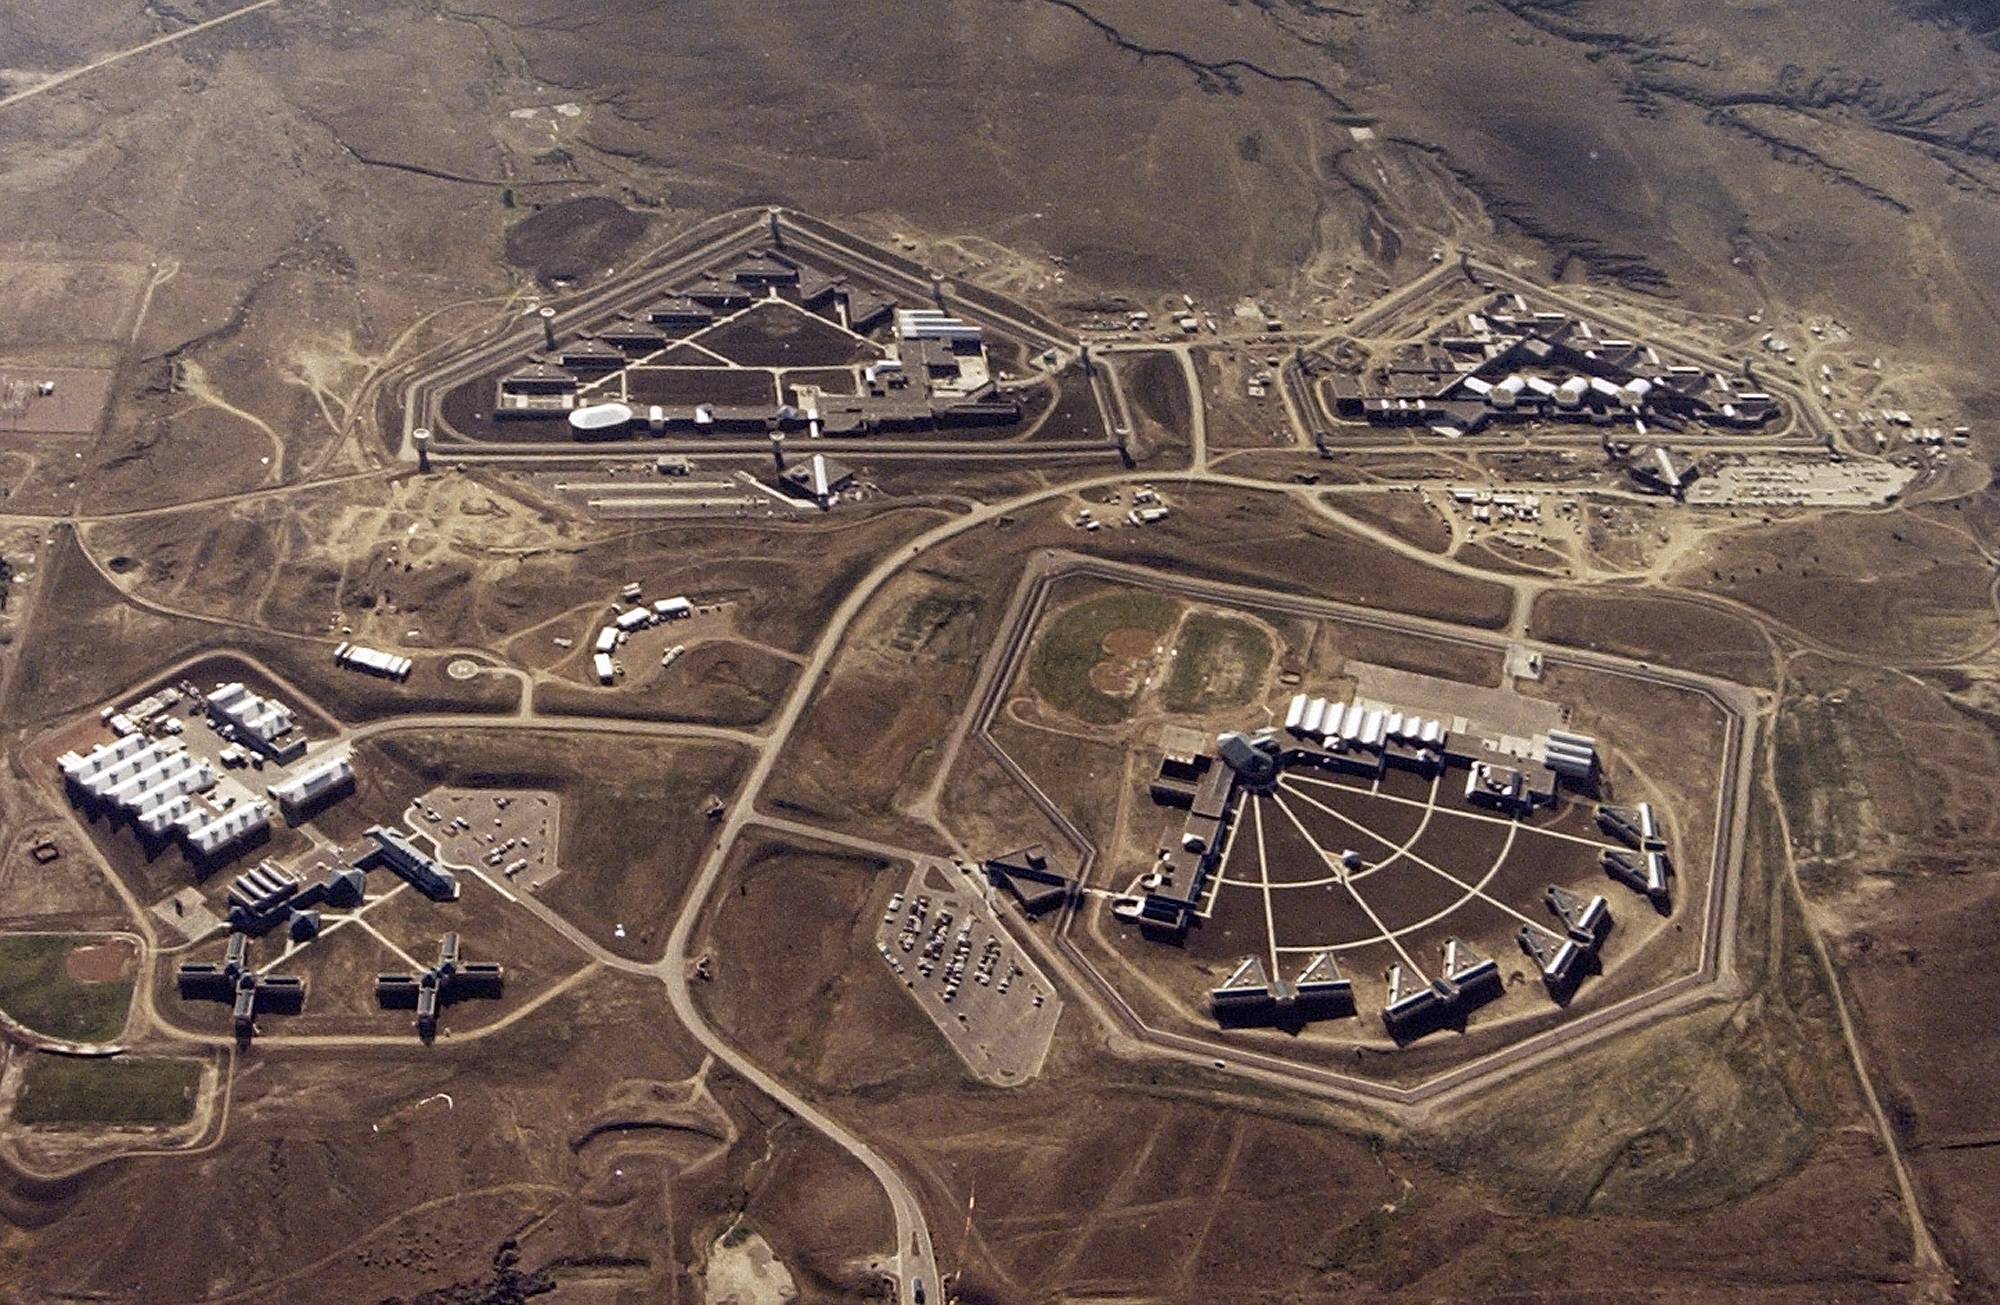 FILE - This Feb. 11, 2004, file photo provided by the Bureau of Prisons shows the Federal Correctional Complex in Florence, Colo. Clockwise from lower left is the minimum security Federal Prison Camp, the high security United States Penitentiary, the maximum security United States Penitentiary and the Federal Correctional Institution. Experts say the drug lord Joaquin 